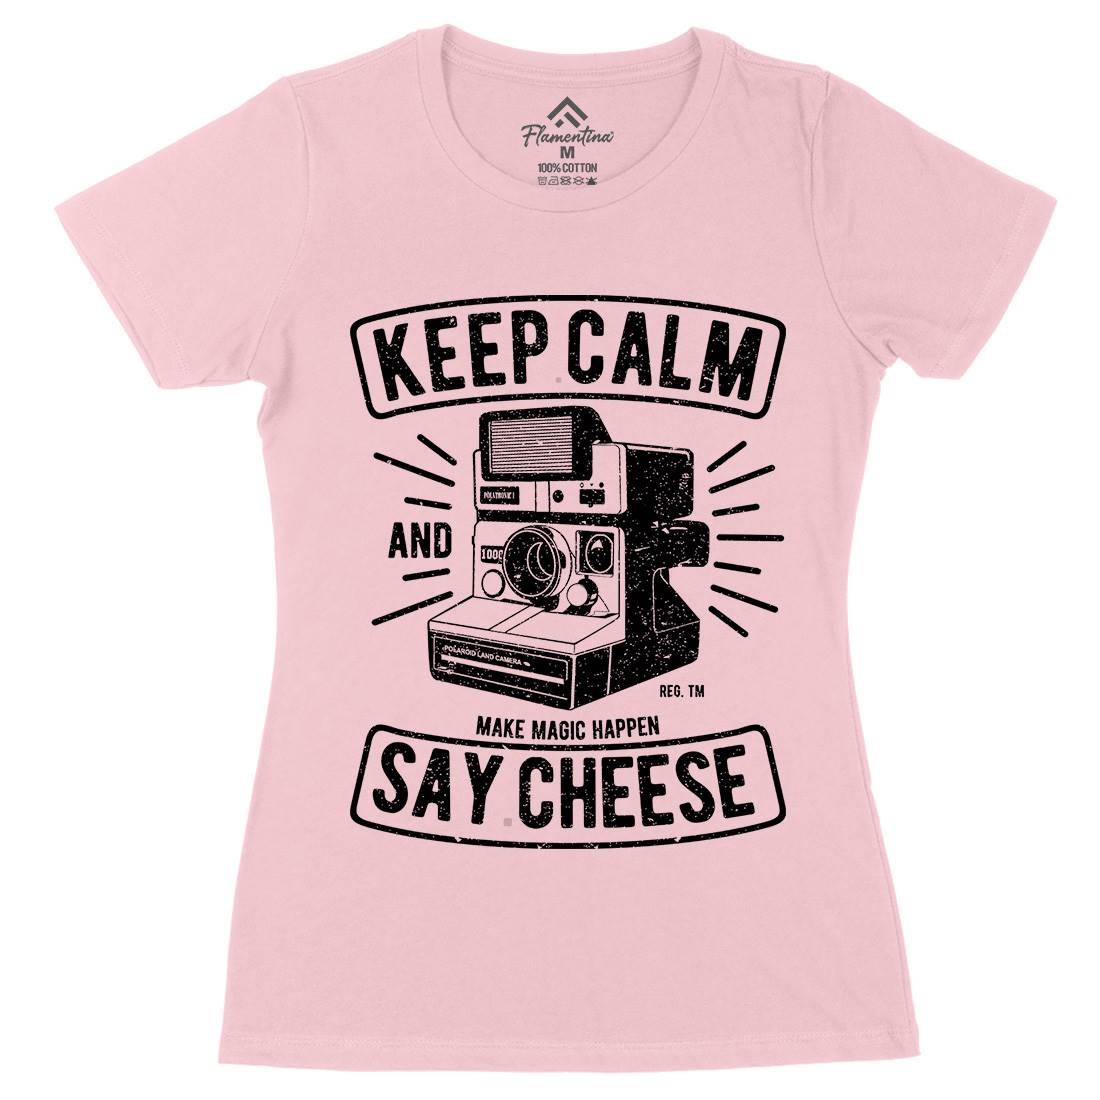 Keep Calm And Say Cheese Womens Organic Crew Neck T-Shirt Media A699